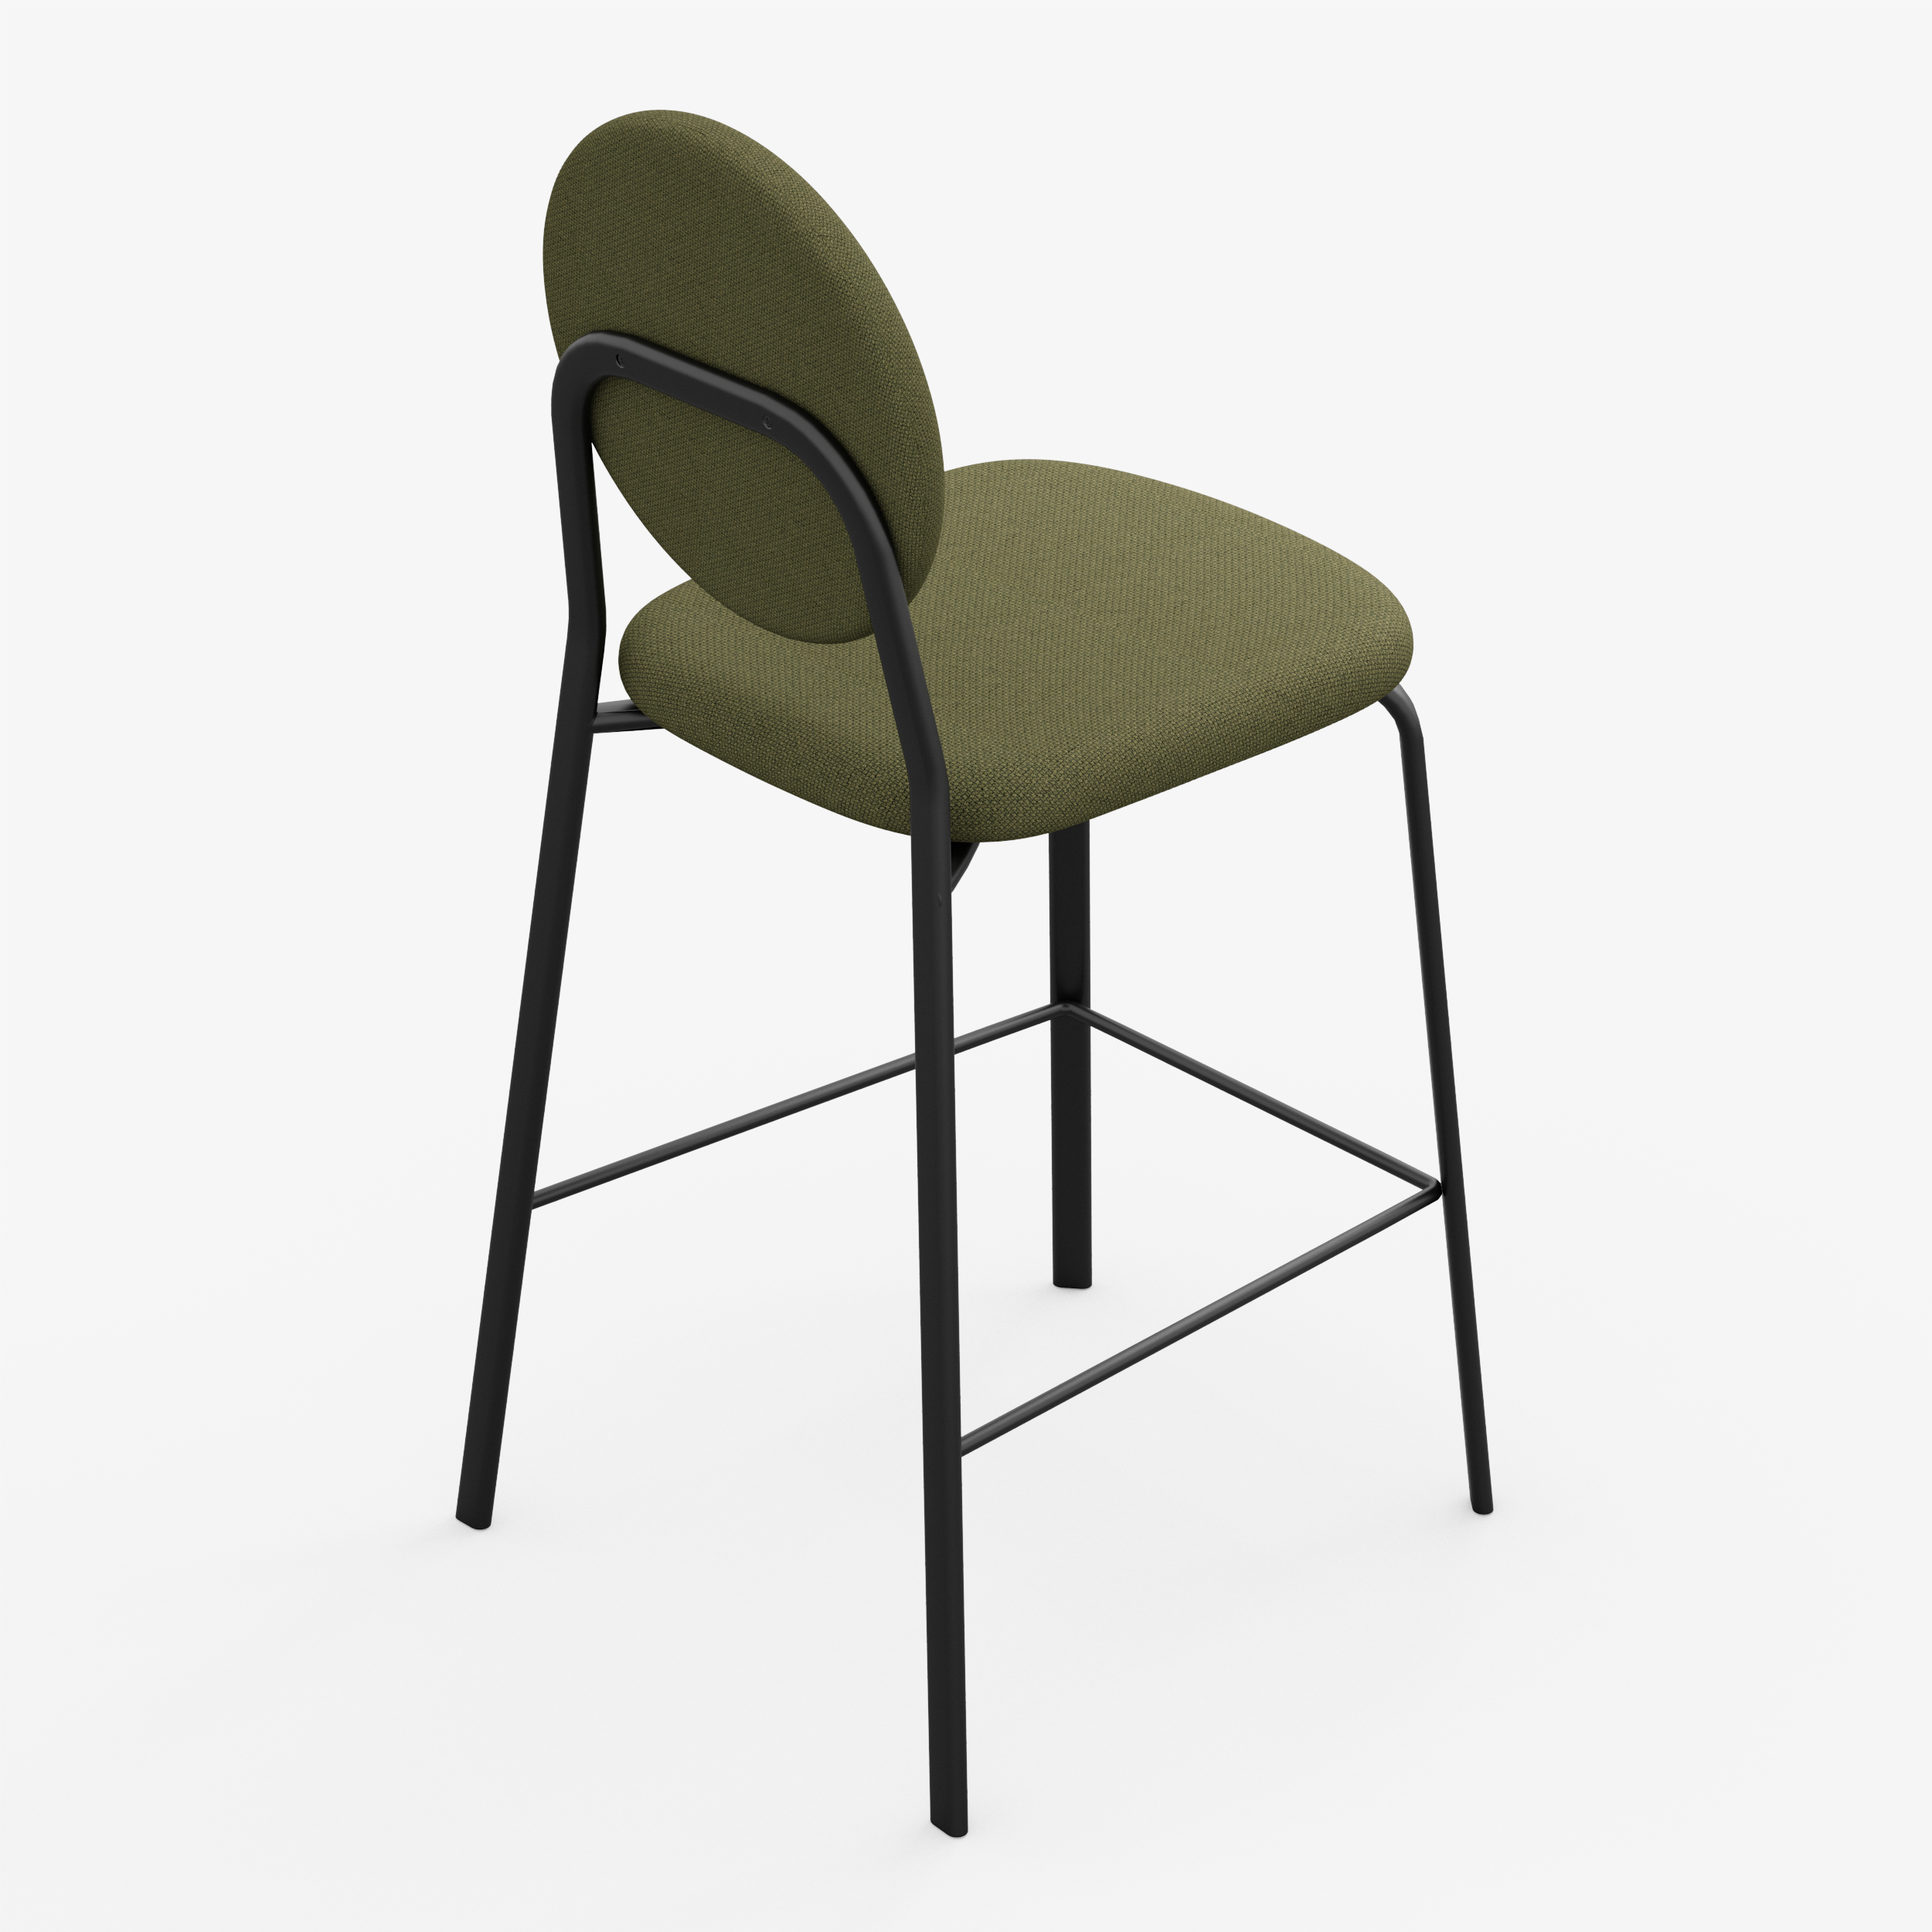 Form - Chair / High (Round, Olive Green)